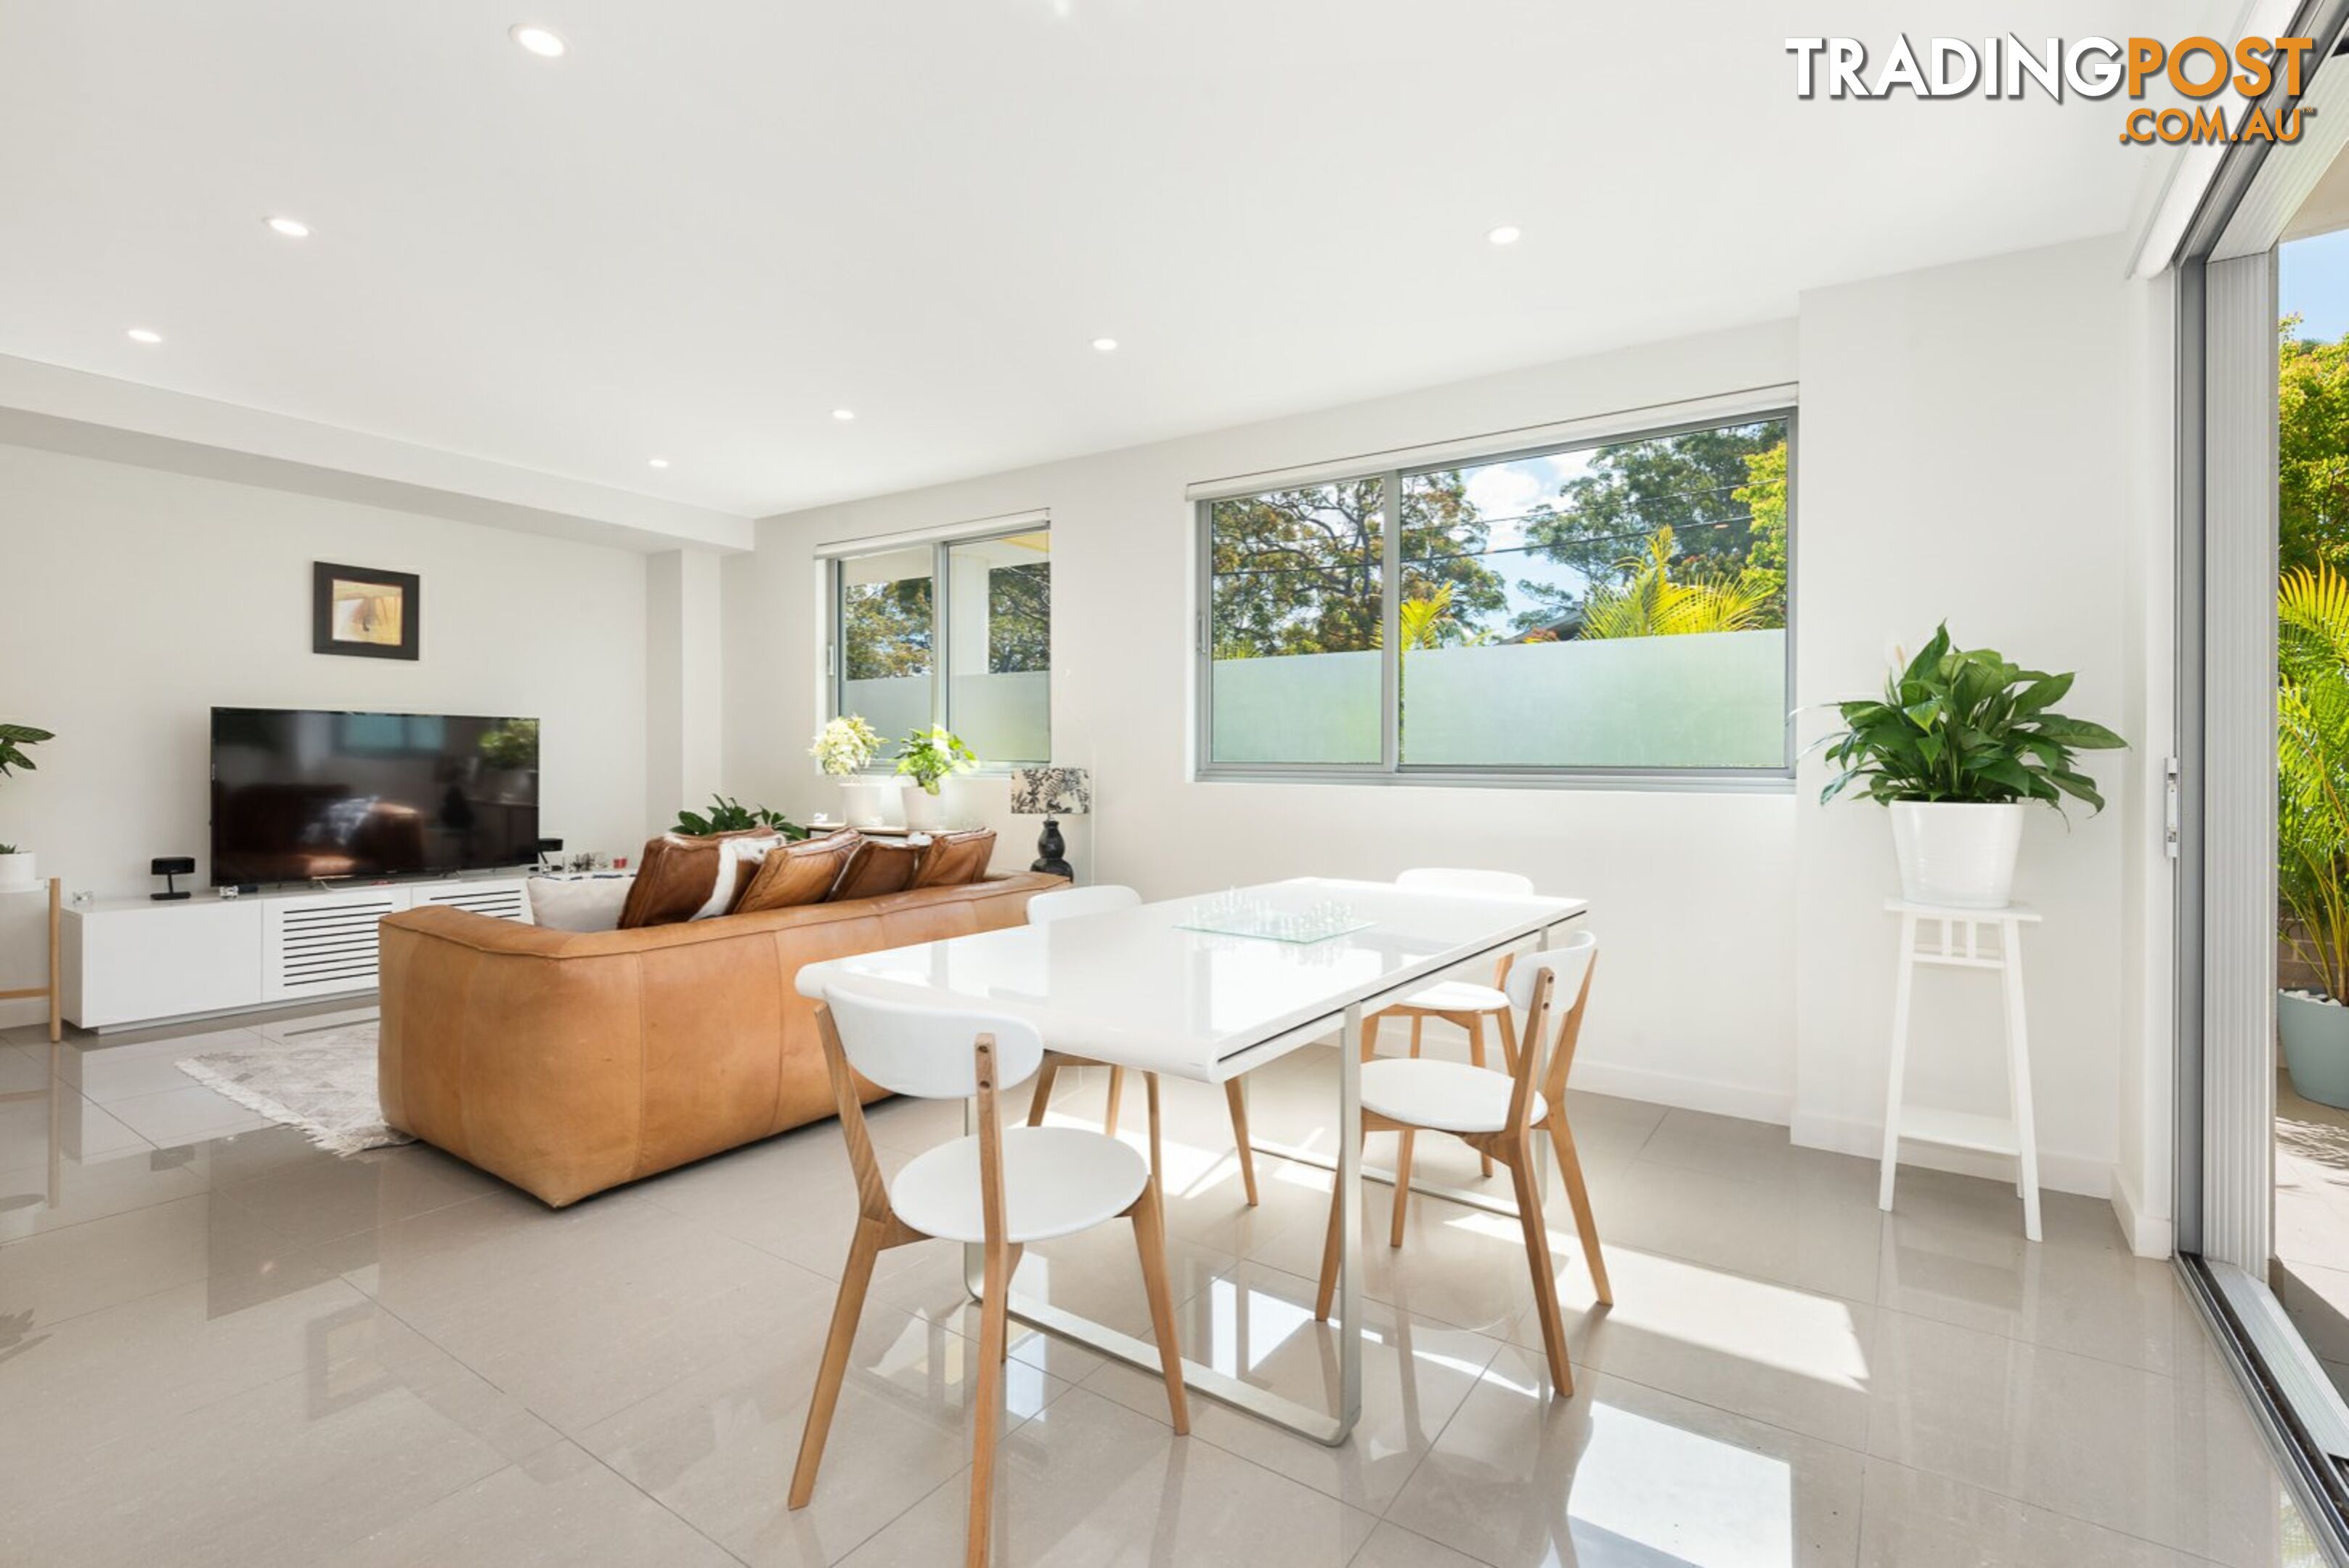 Apartment 2103/177 Mona Vale Road ST IVES NSW 2075